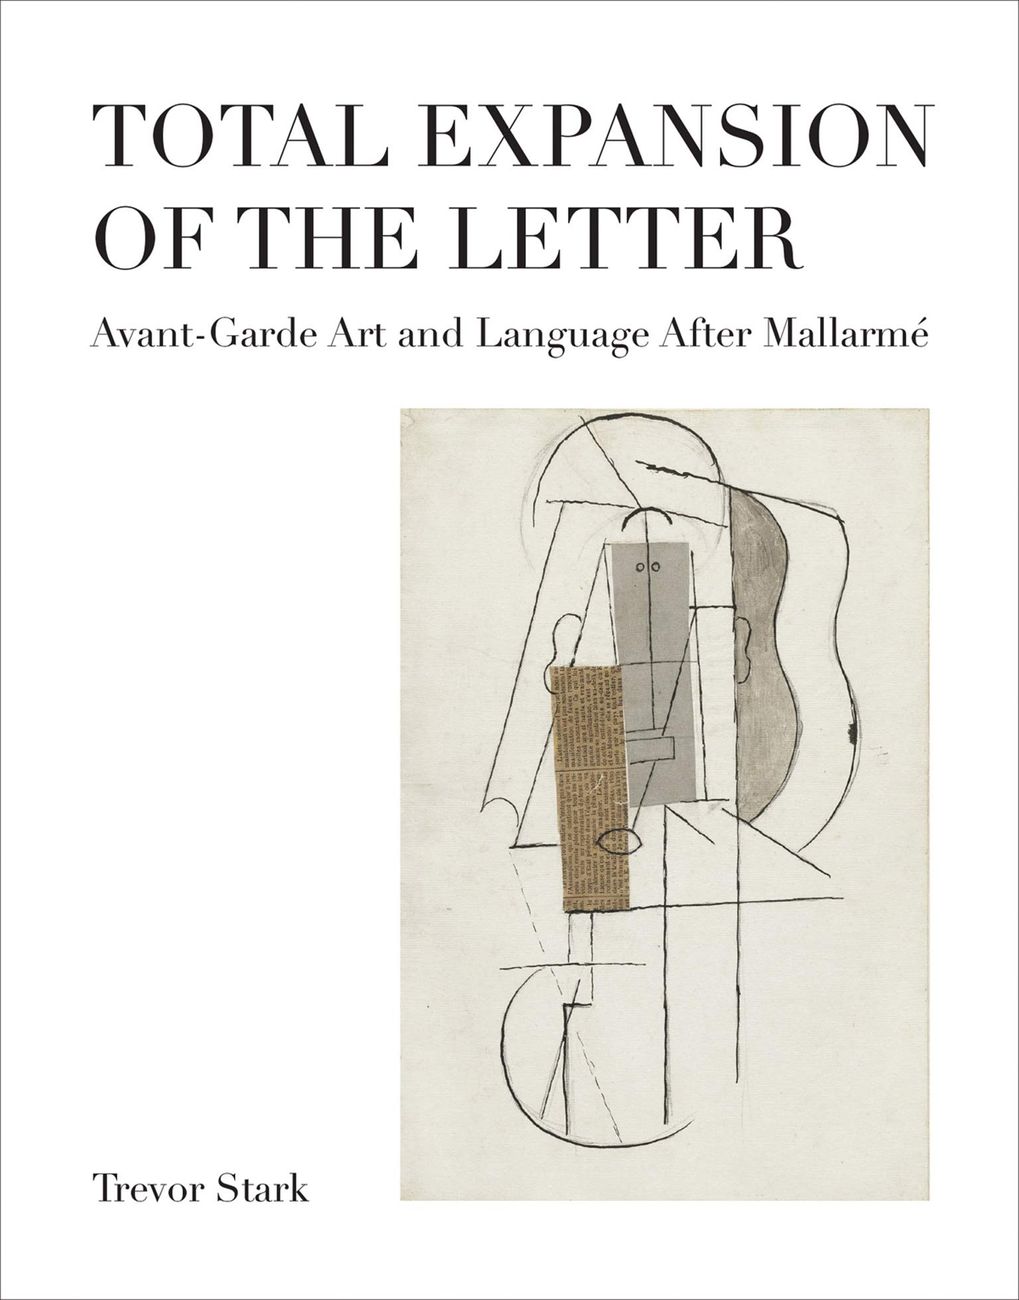 Trevor Stark – Total Expansion of the Letter. Avant garde Art and Language after Mallarmé (The MIT Press, Cambridge (Mass.) London 2020)